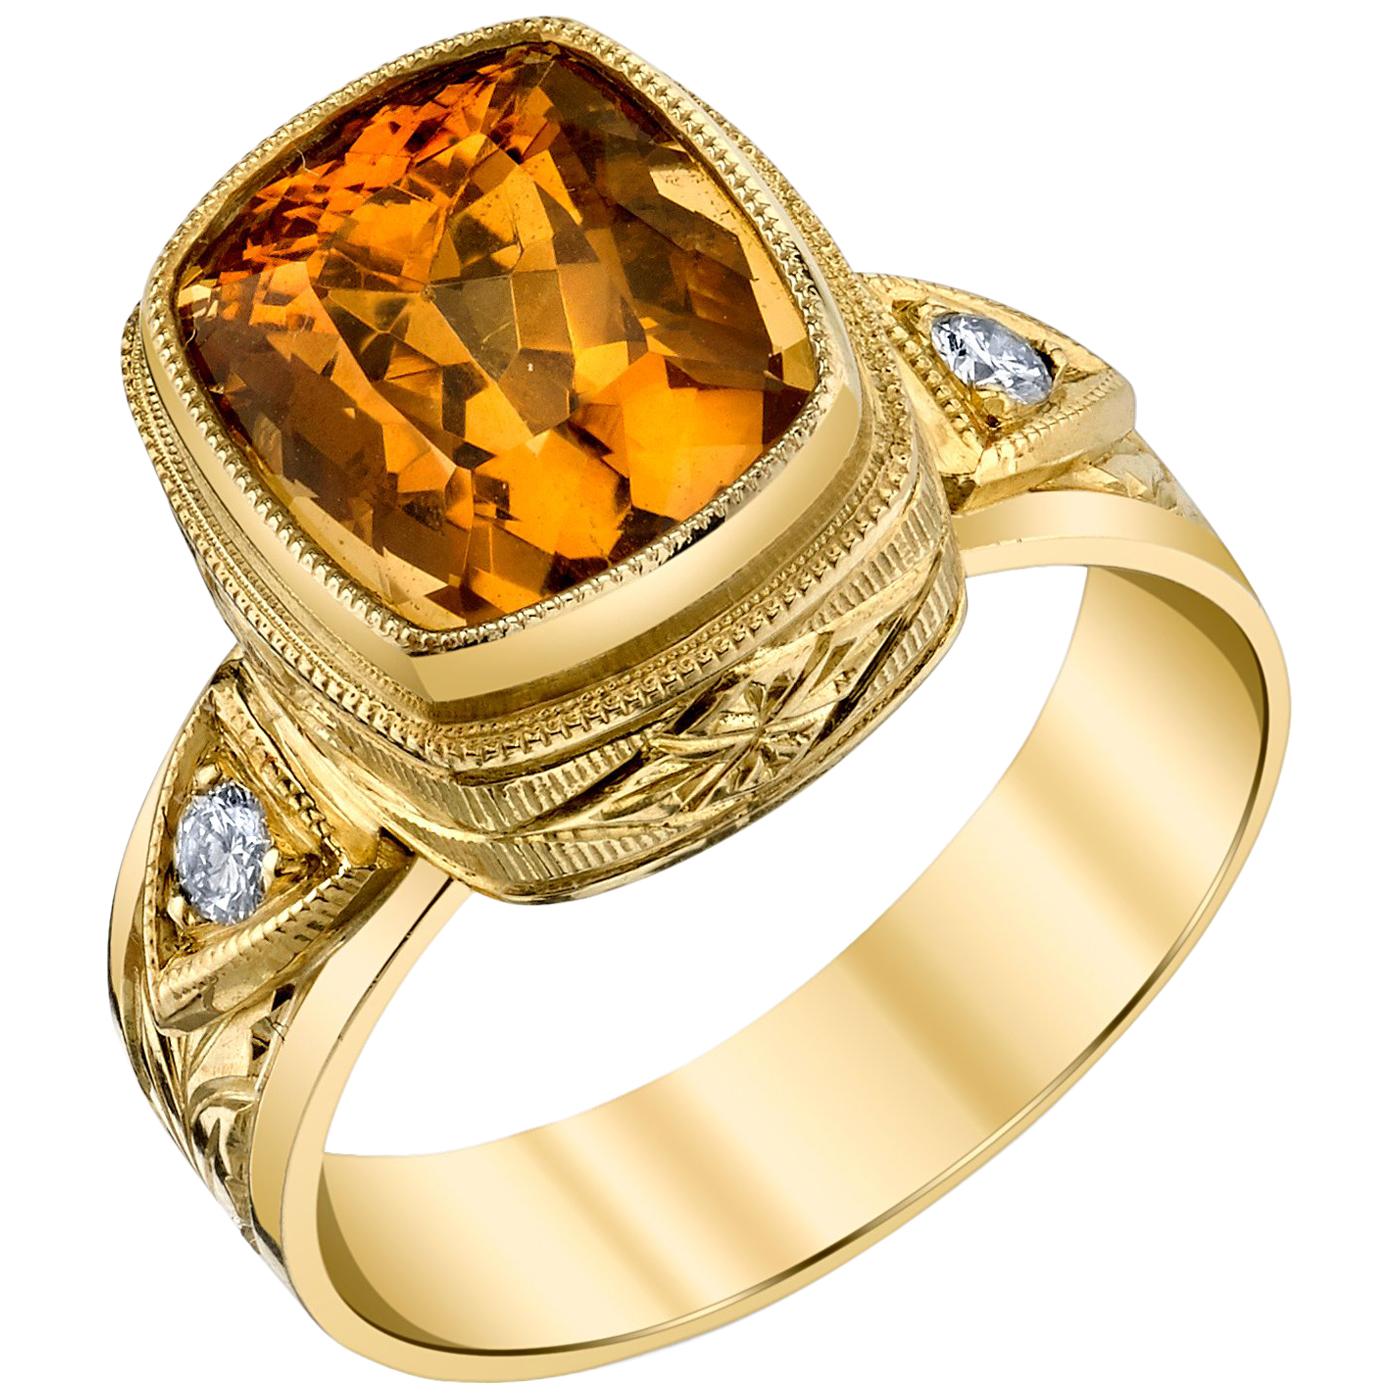 5.73 ct. Orange Zircon and Diamond Band Ring in 18k Yellow Gold For Sale